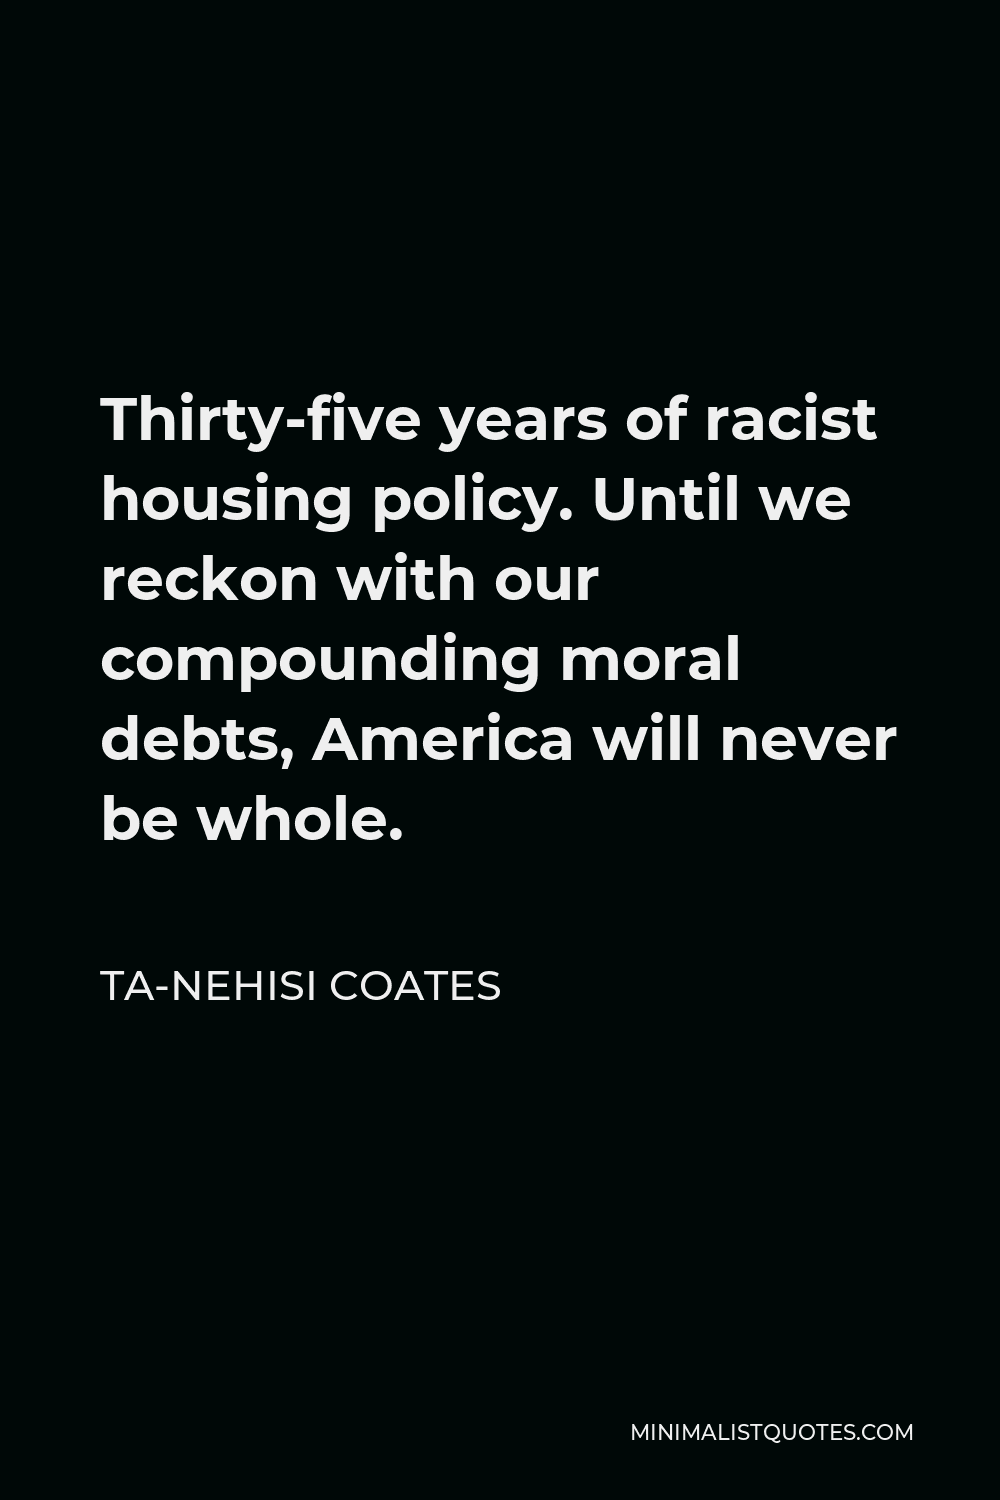 Ta-Nehisi Coates Quote - Thirty-five years of racist housing policy. Until we reckon with our compounding moral debts, America will never be whole.